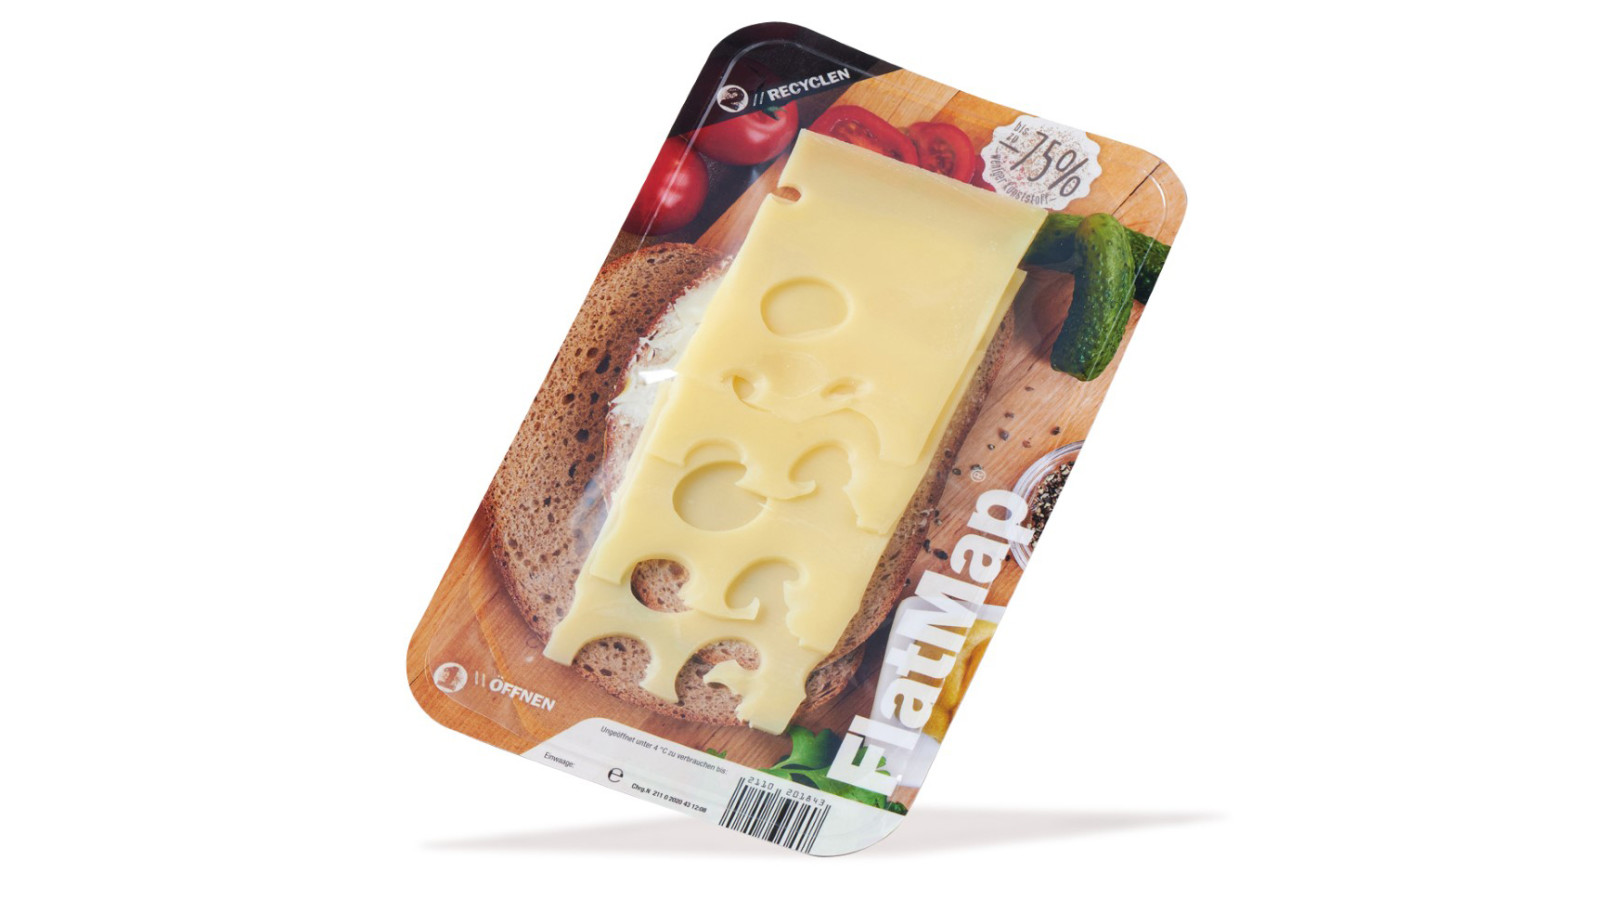 FlatMap from Nemco is the perfect solution for highlighting the product in the refrigerated display. We have a wide range of cheese and dairy packaging, several of which are reusable or plastic-reduced skin pack products.